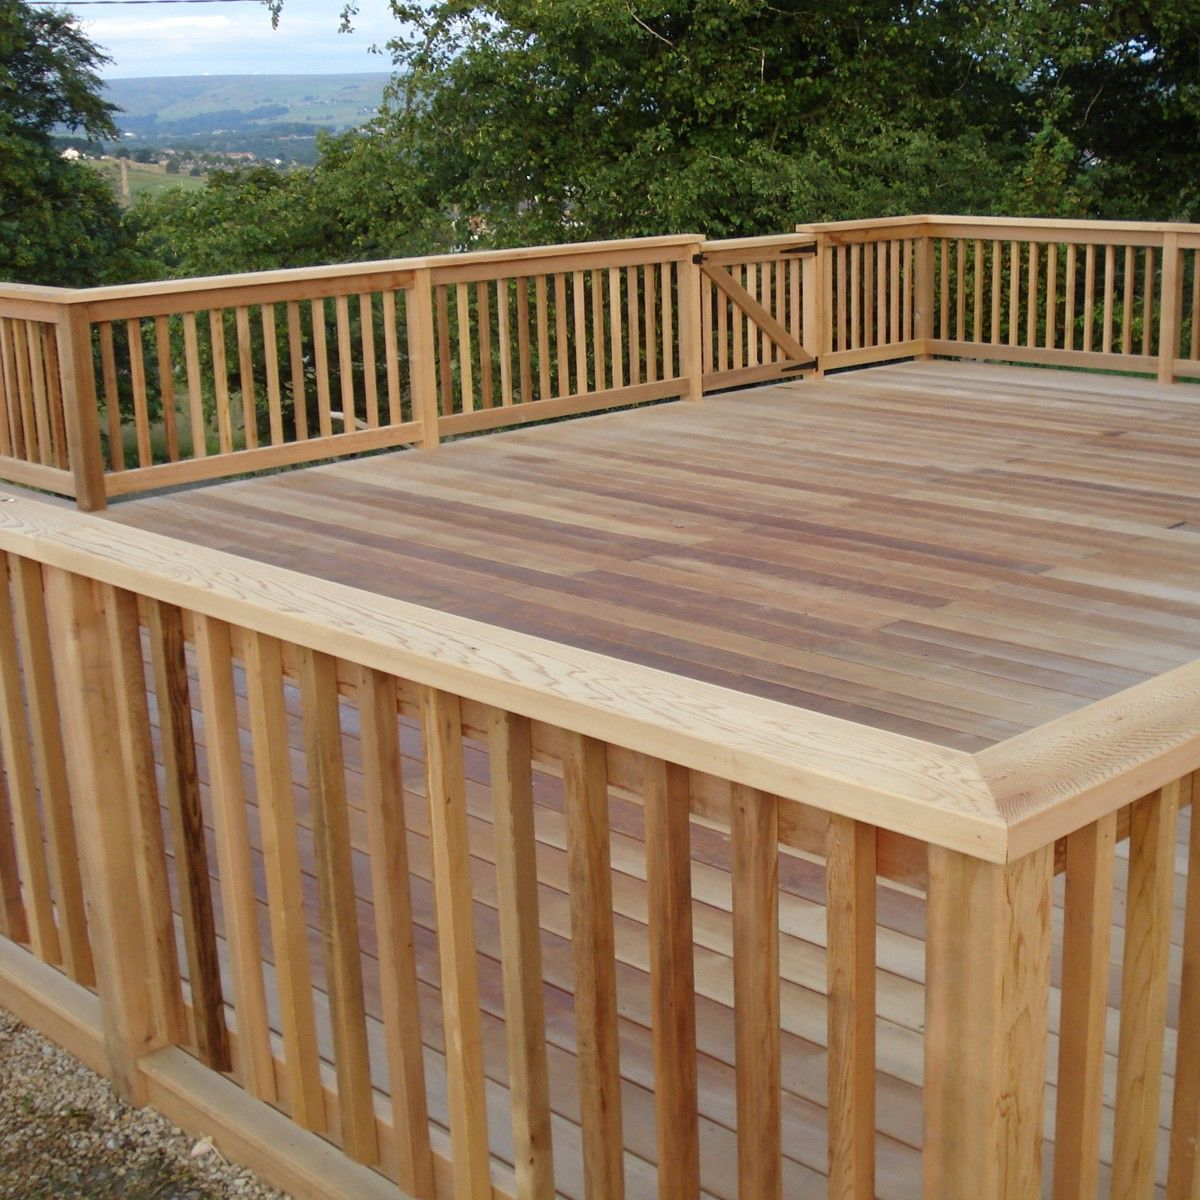 Wood Deck Railing Ideas When It Comes To Deck Handrails There Are regarding dimensions 1200 X 1200